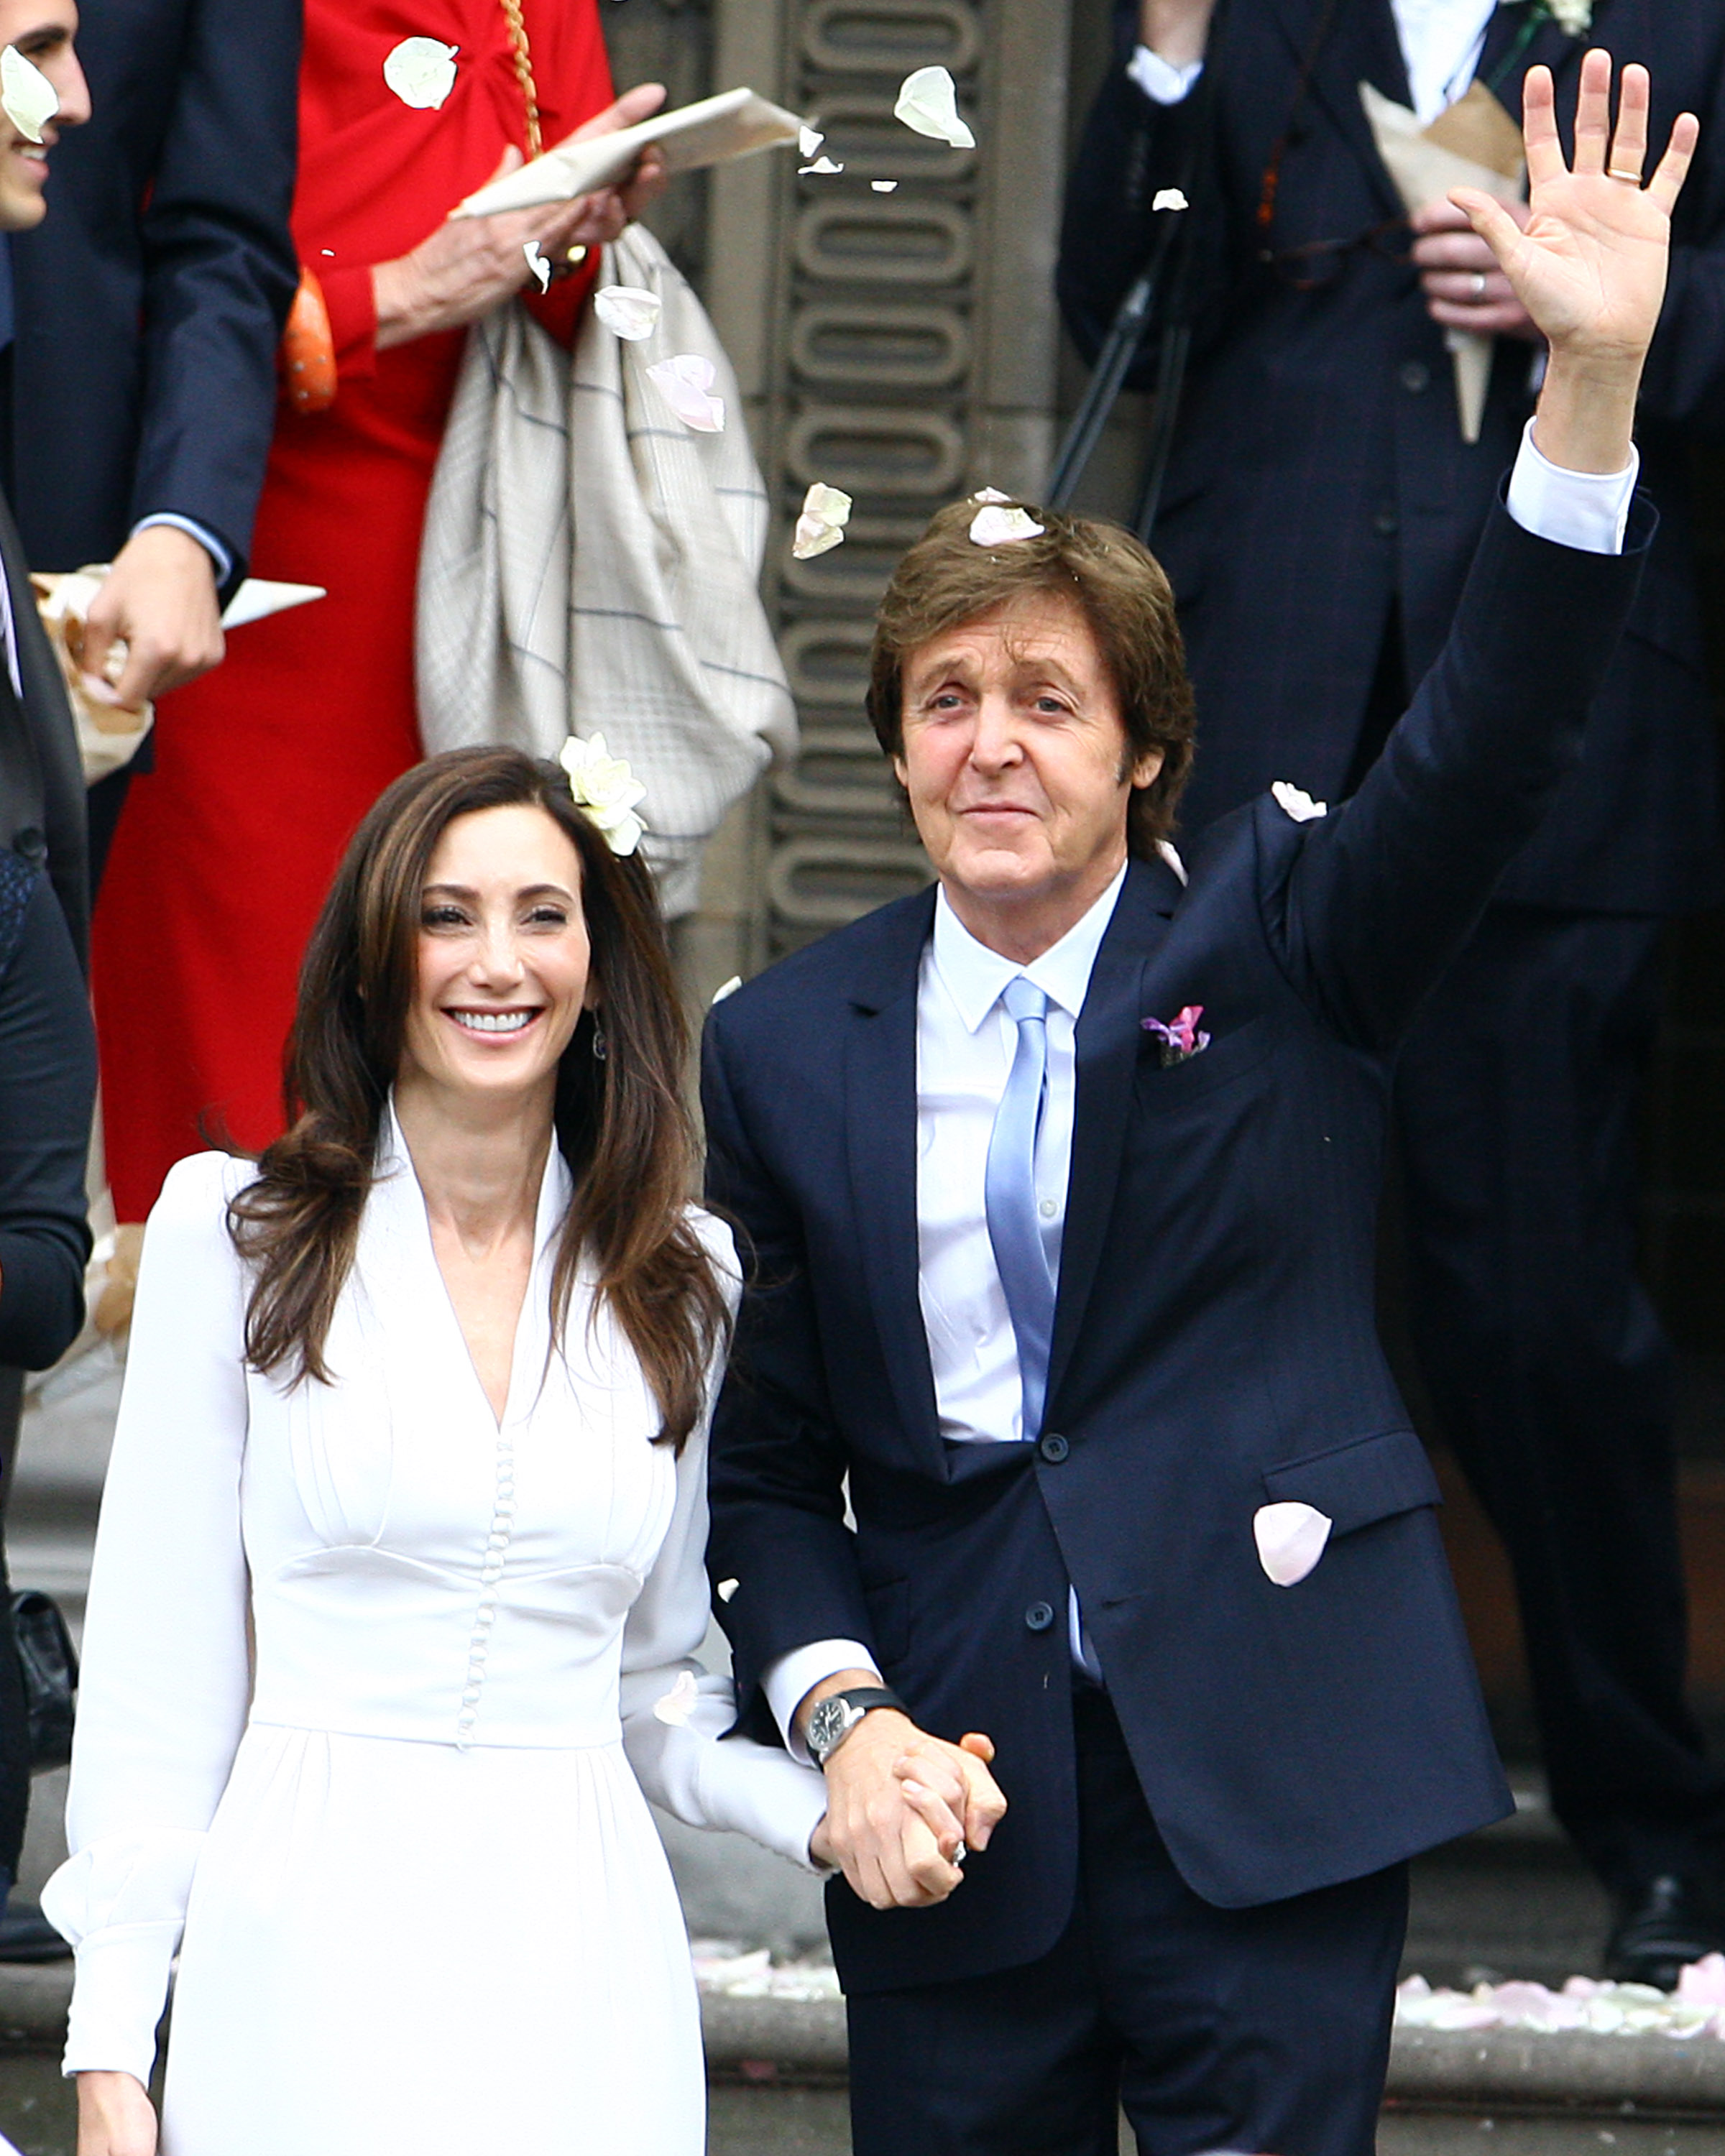 Sir Paul McCartney and Nancy Shevell in London, England on October 9, 2011 | Source: Getty Images